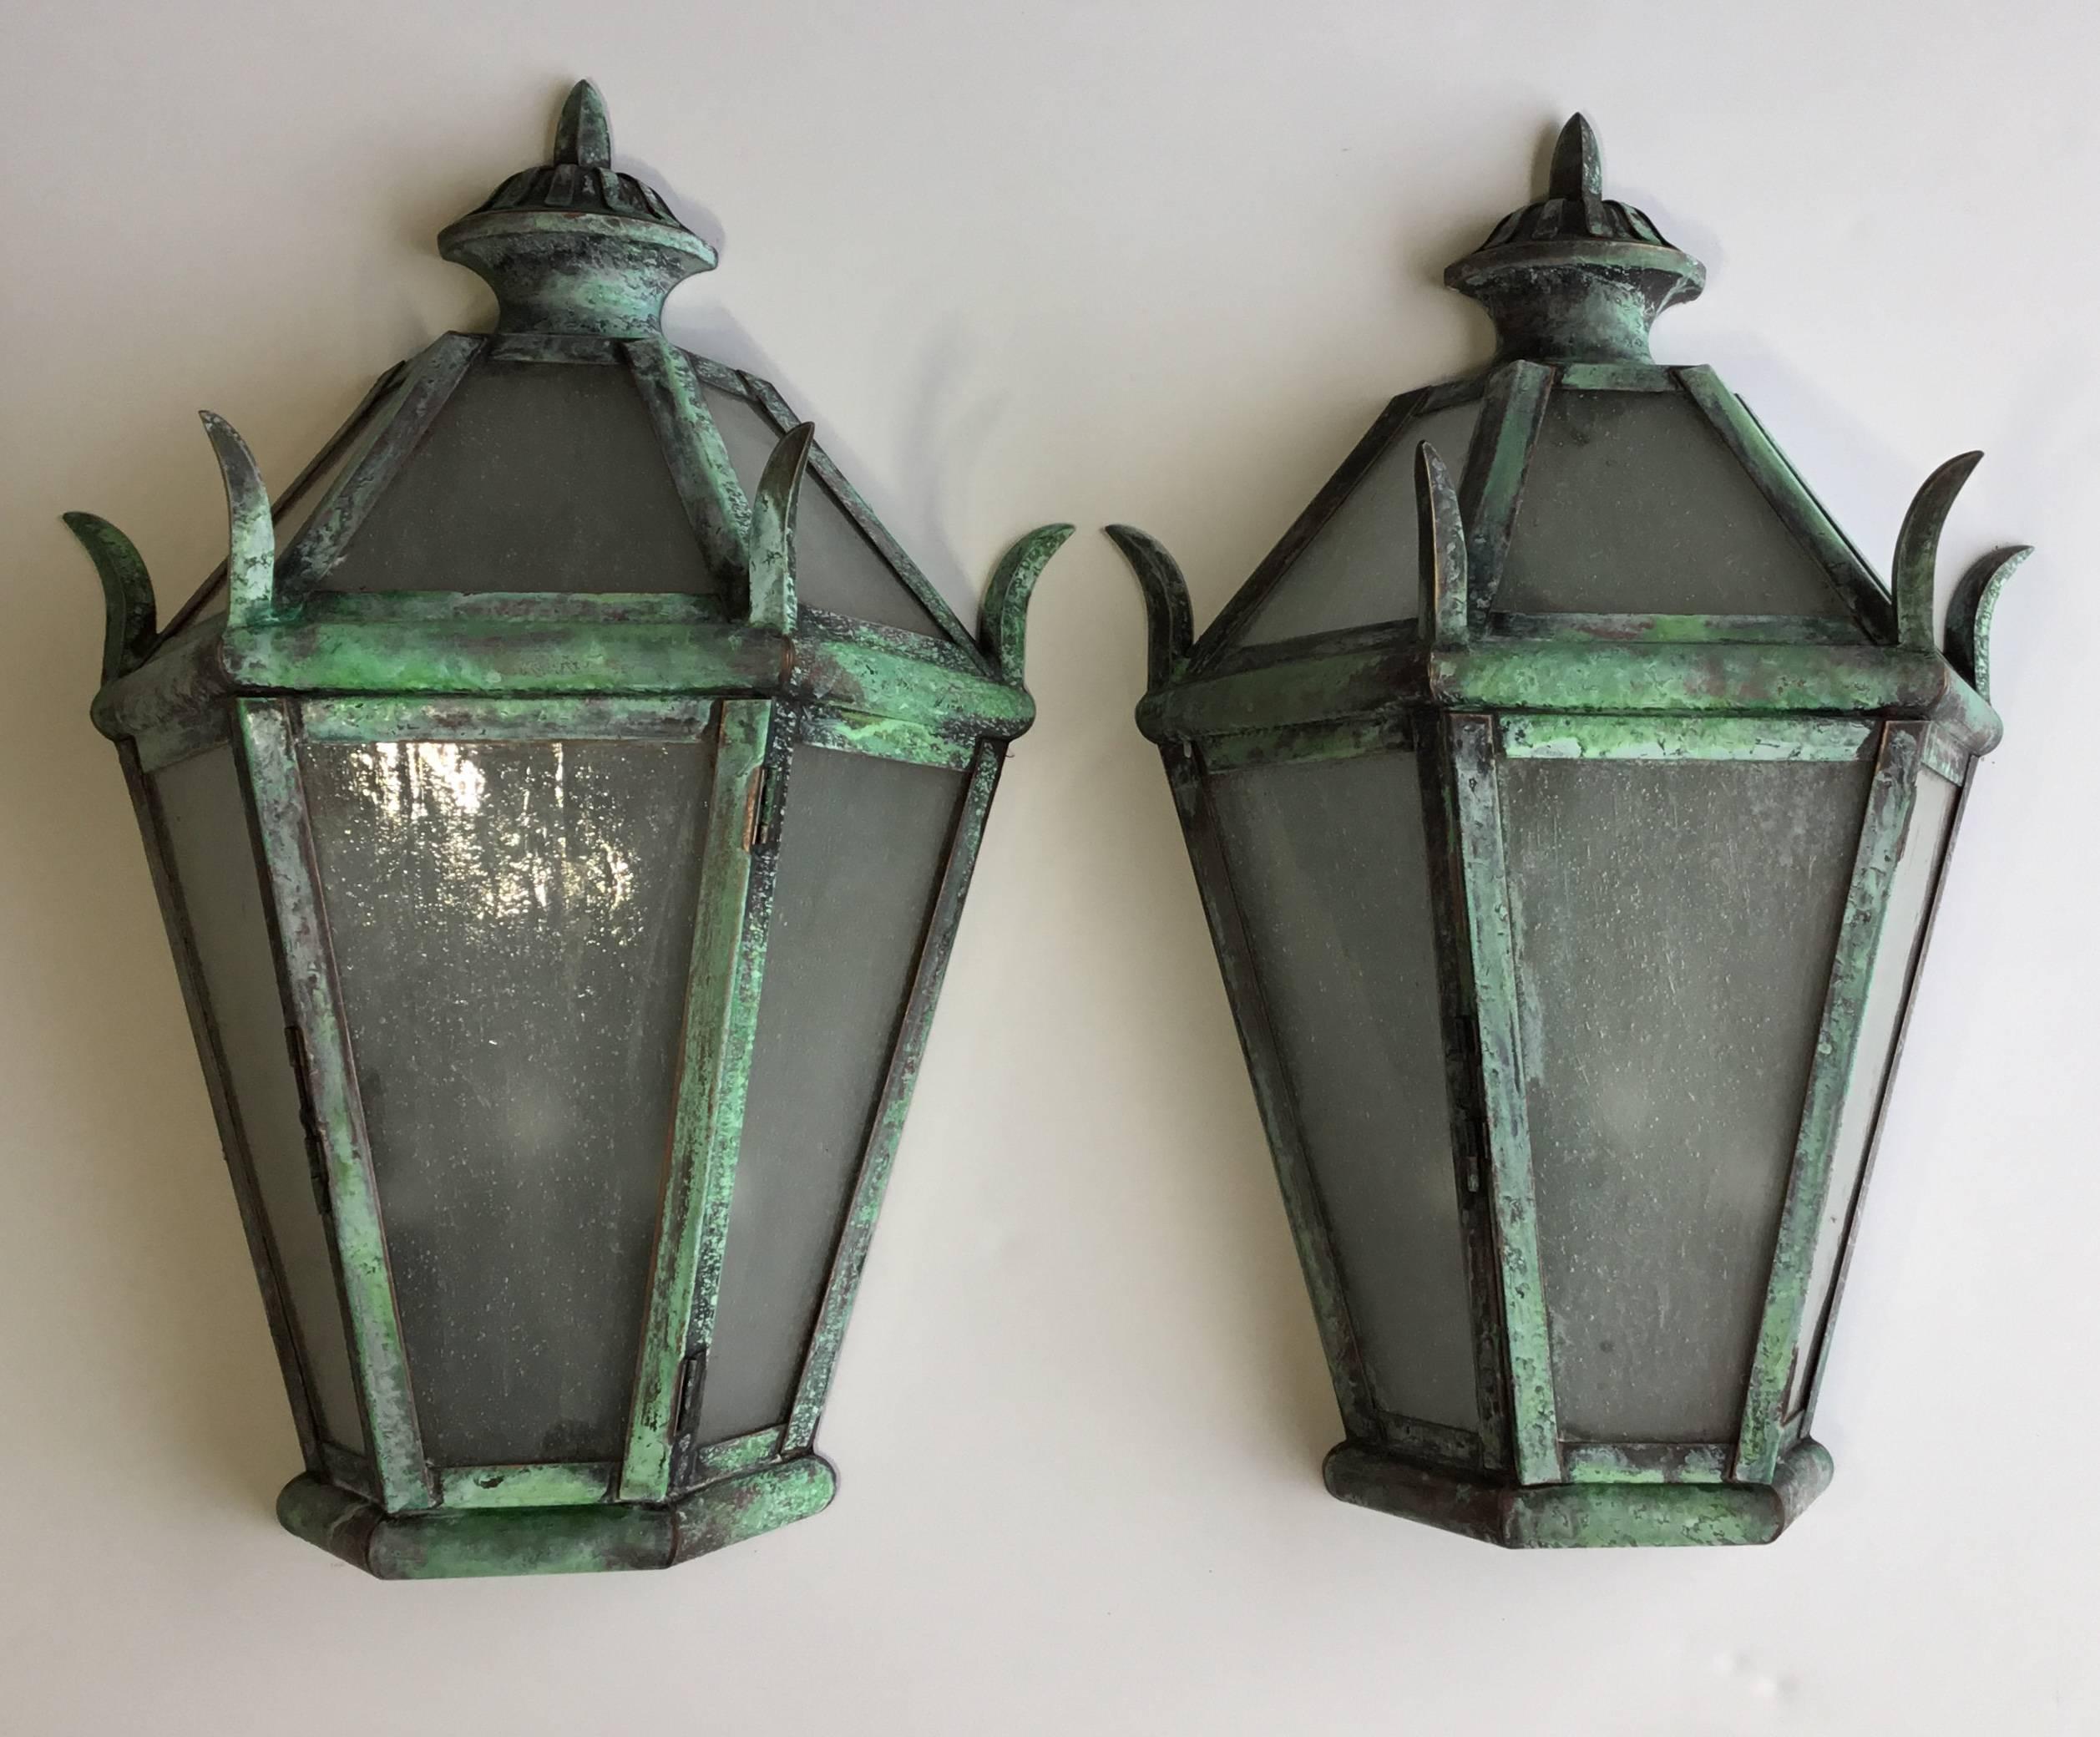 Impressive pair of wall hanging lanterns hand cratered from solid brass , with three 40/watt lights each , electrified and ready to use. Suitable for wet locations, UL approved up to US code.
Light milk glass color.